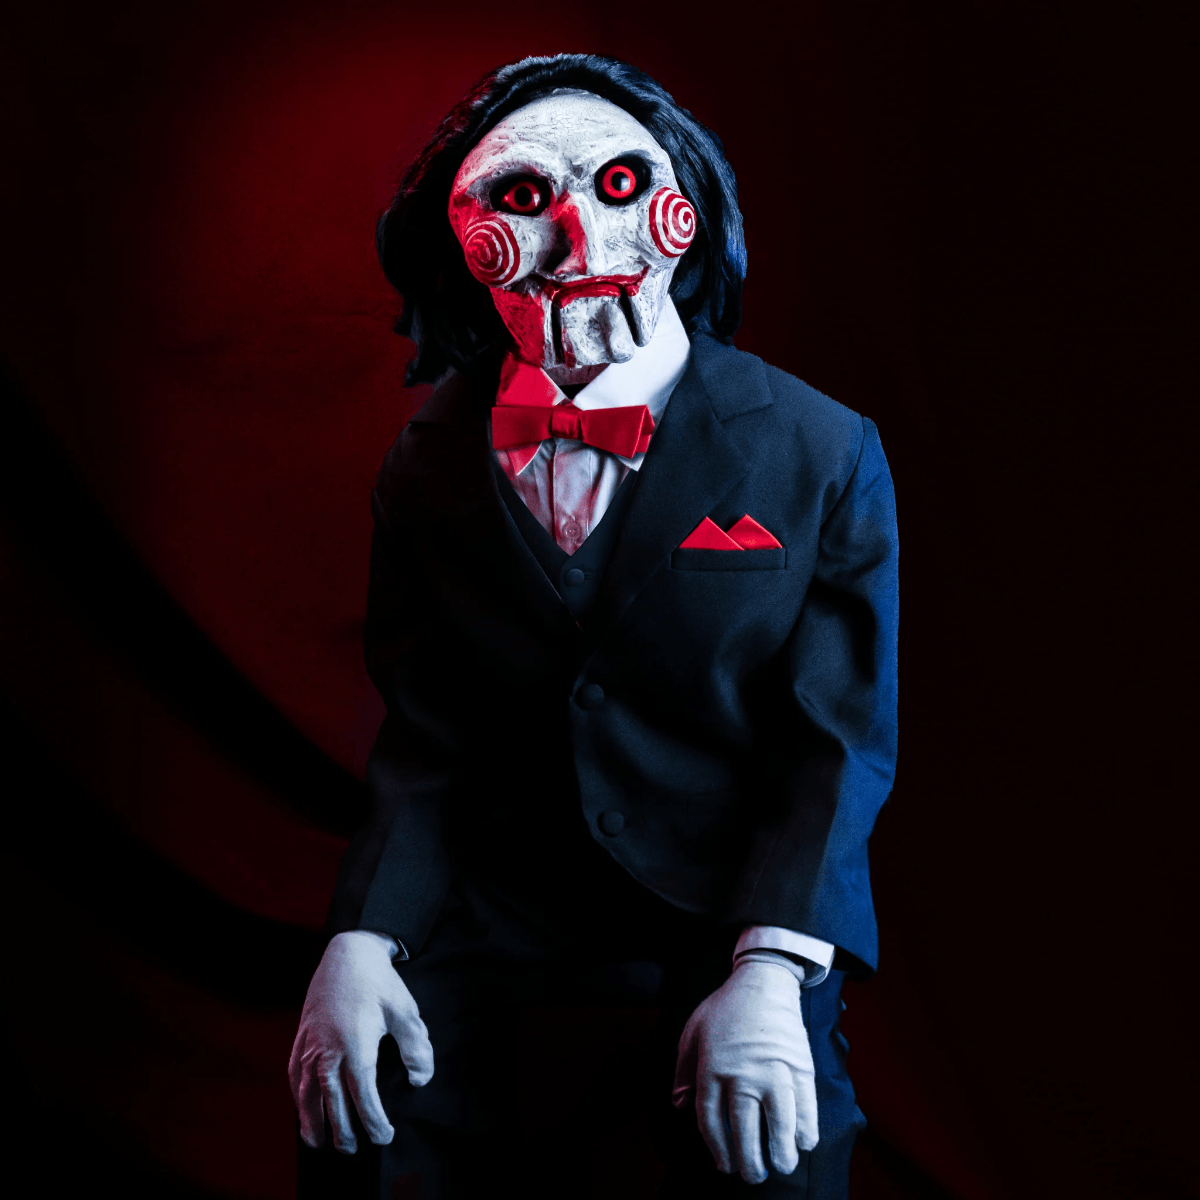 TTSMALG102 Saw - Billy Puppet Prop Replica with Sound & Motion - Trick or Treat Studios - Titan Pop Culture